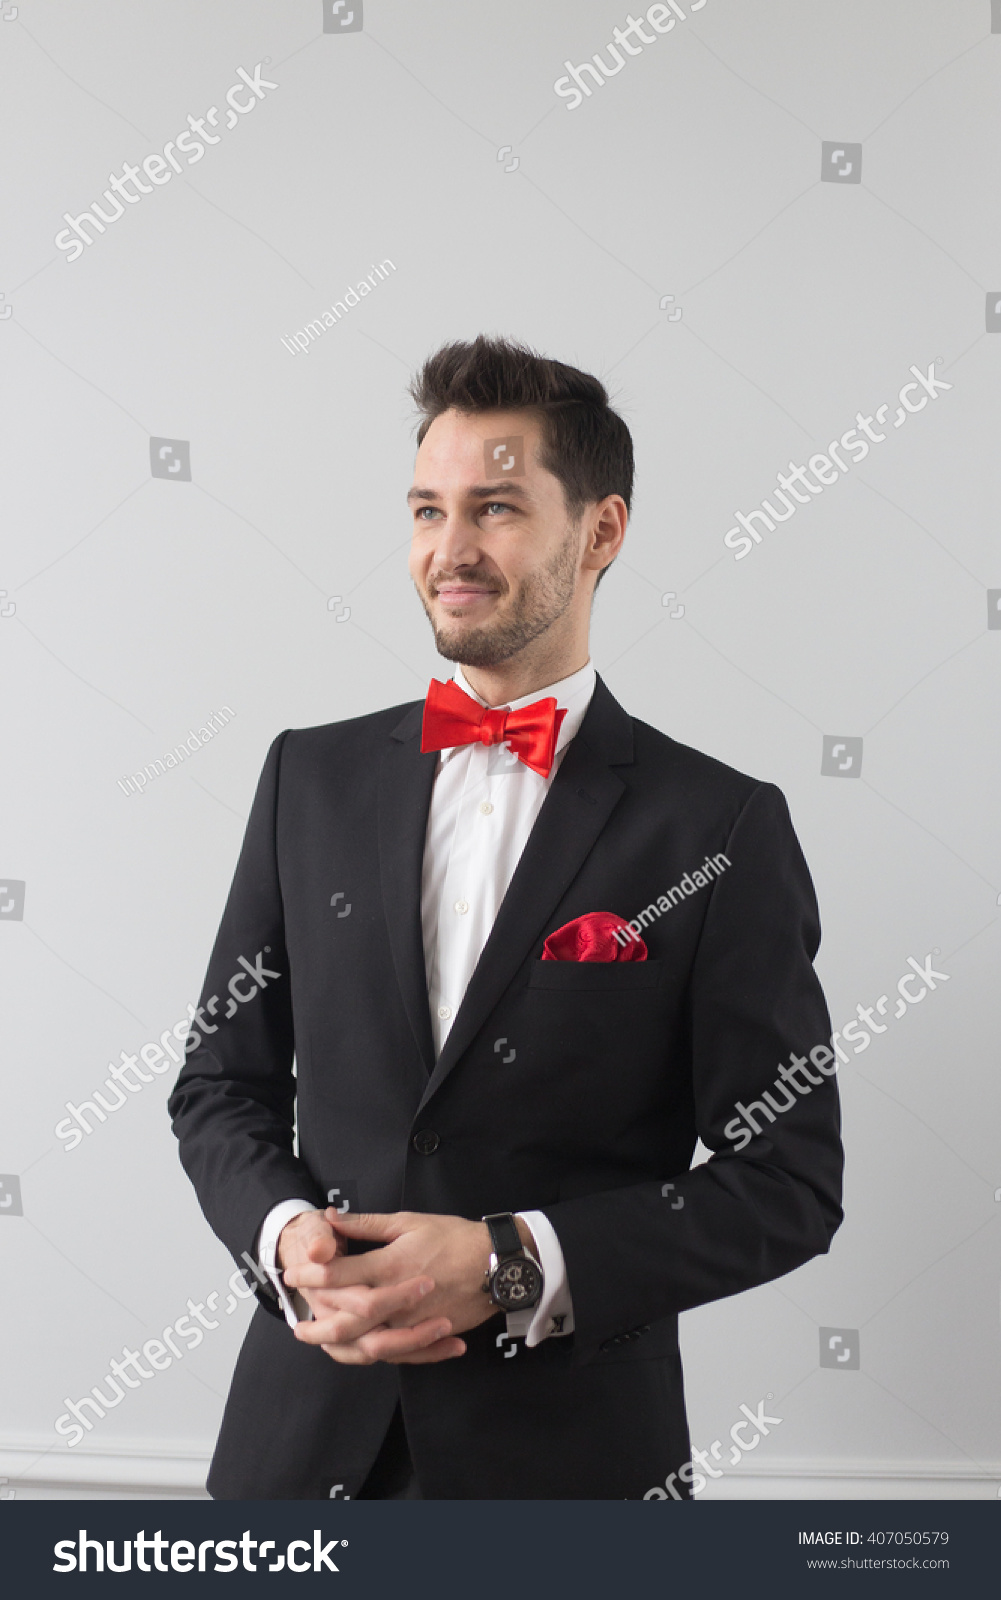 Royalty-free Portrait of a handsome young man.… #407050579 Stock